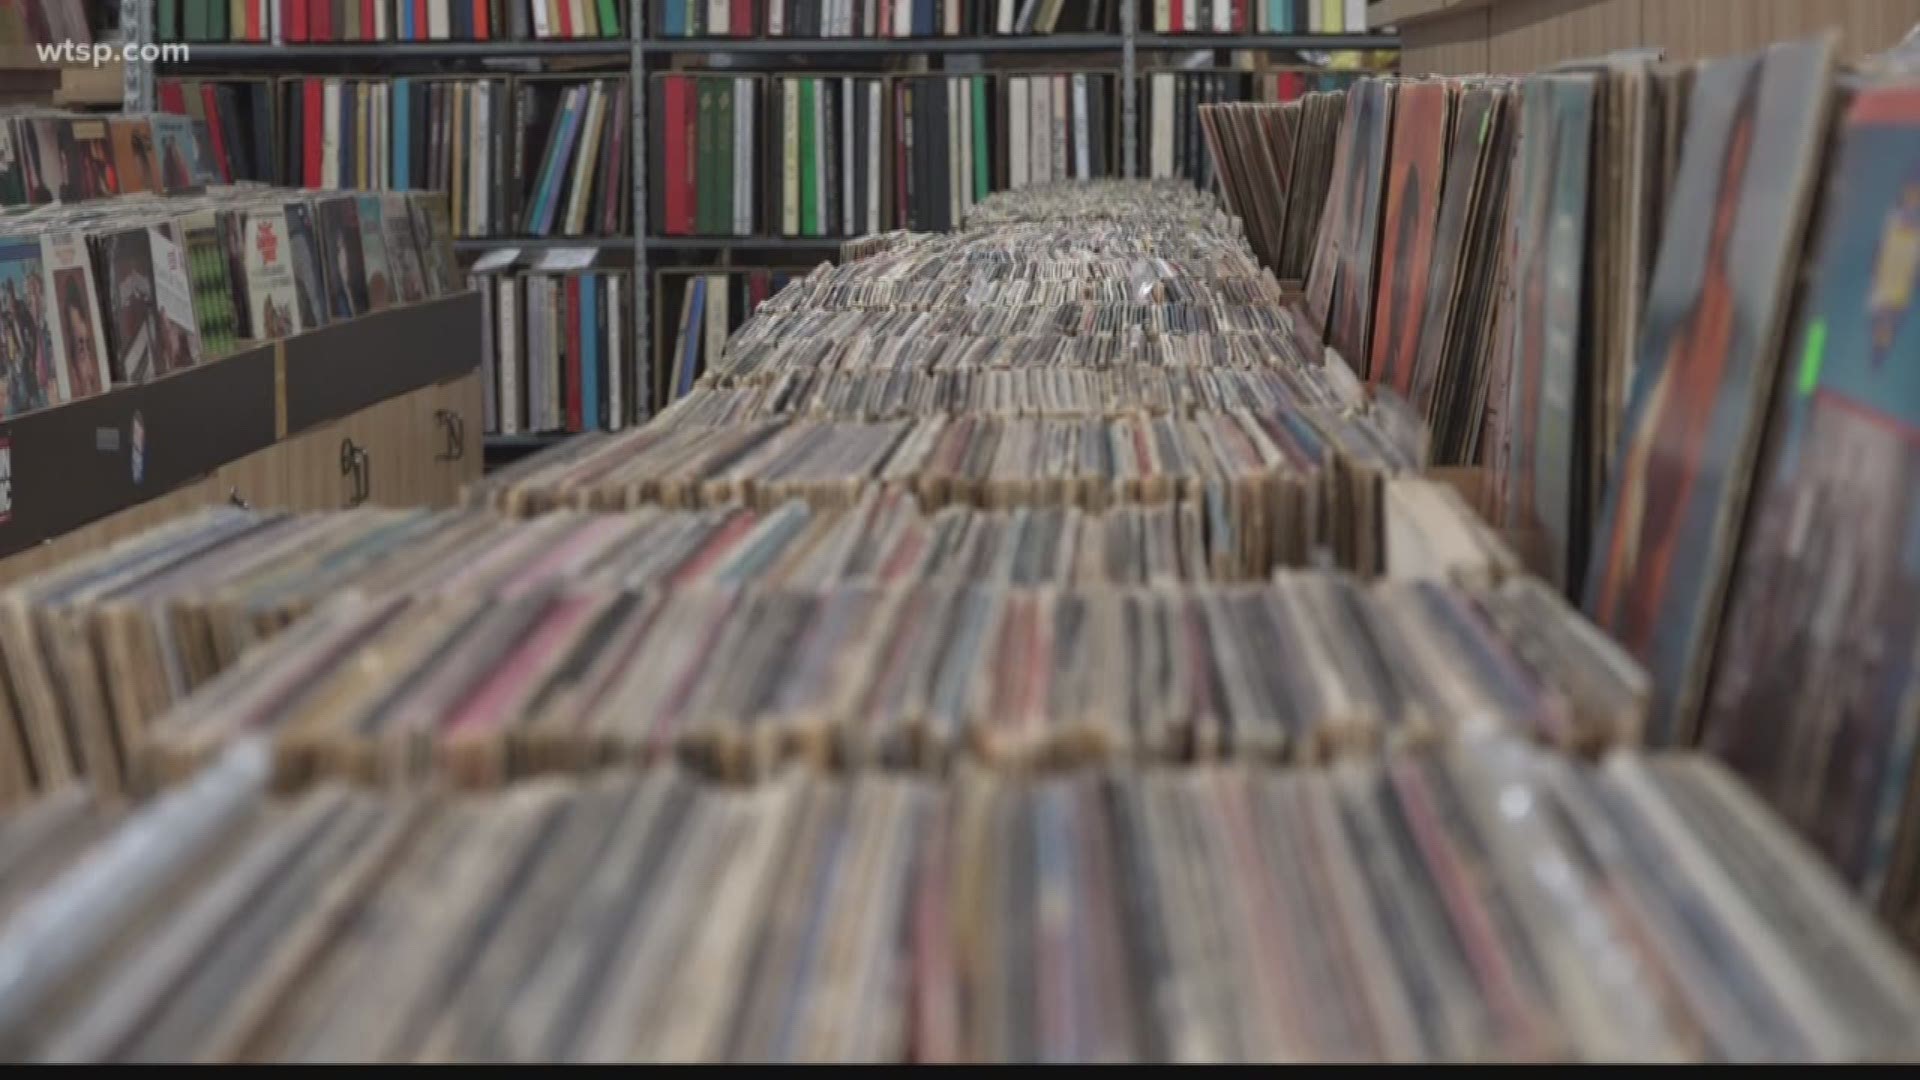 Ahead of music's biggest night, the Grammys, 10News looks at the growing trending of buying vinyl records again.